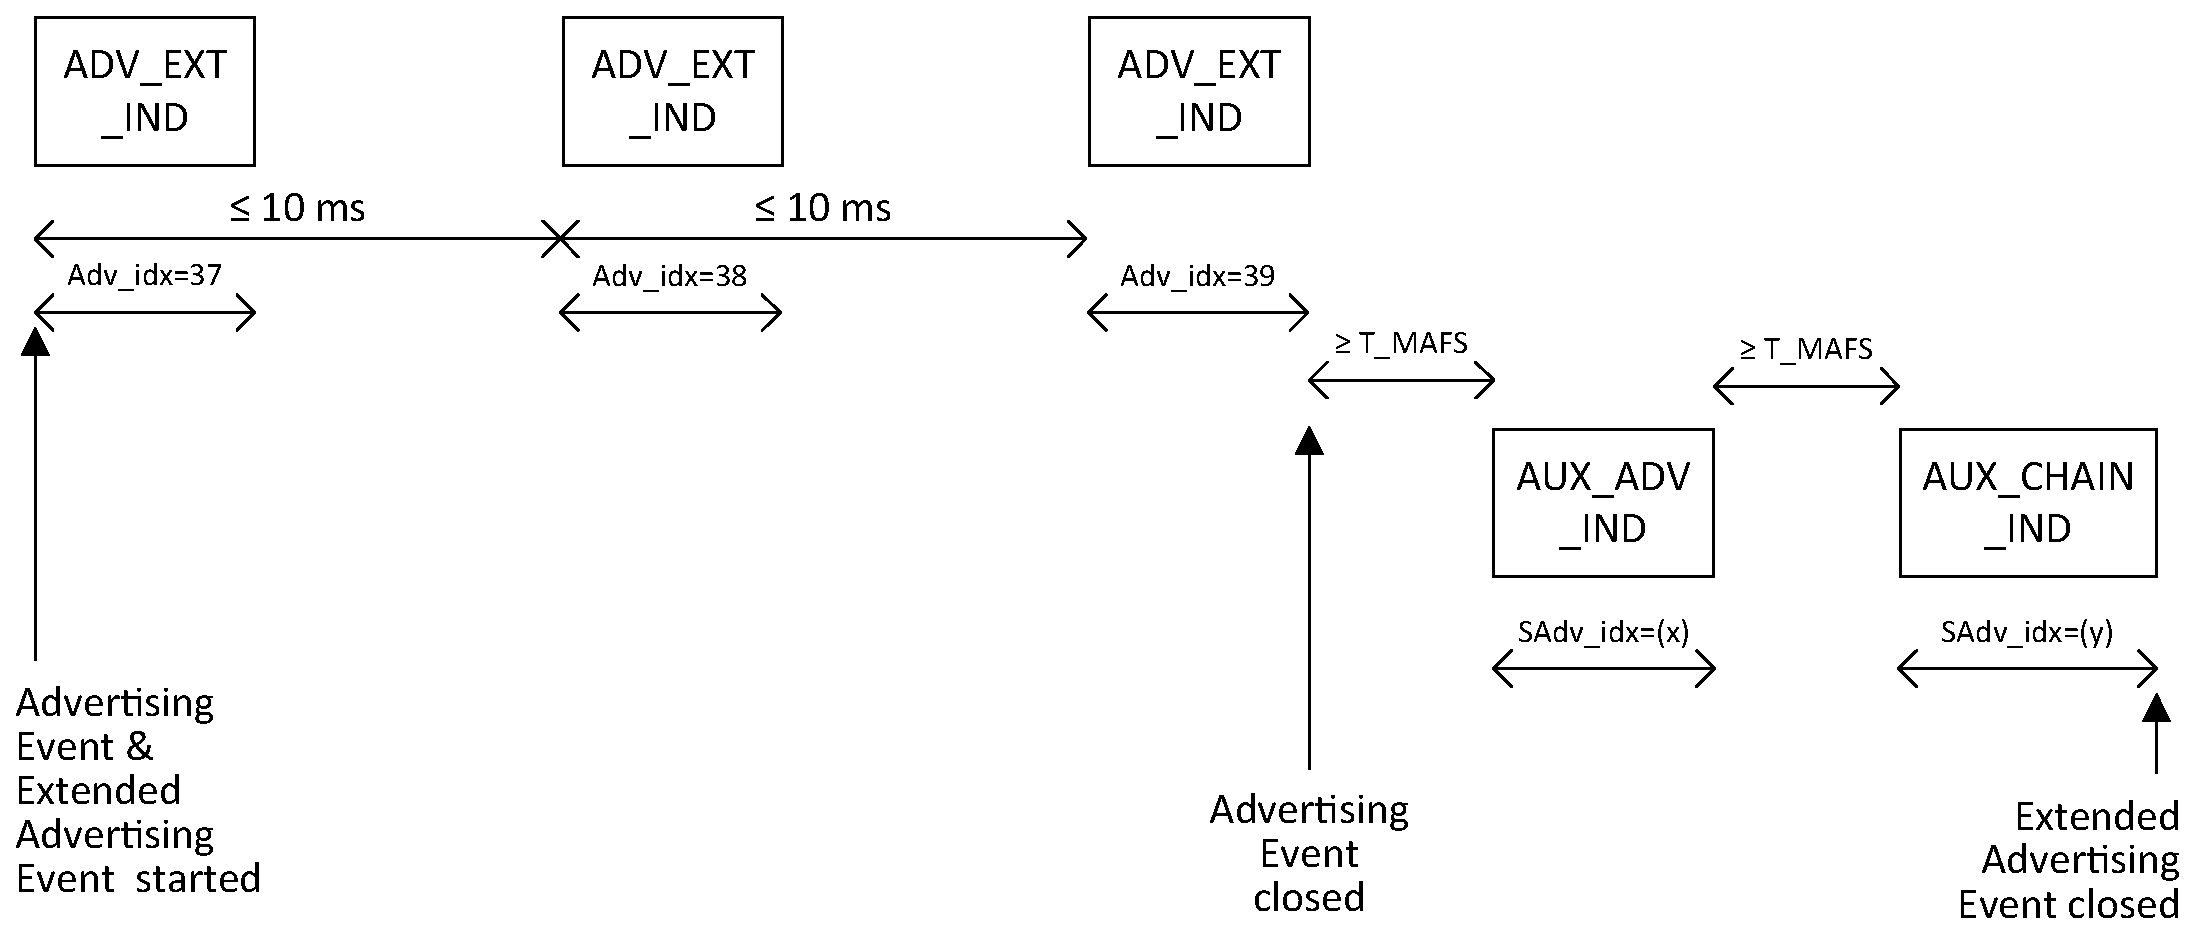 Non-connectable and non-scannable undirected advertising event using the ADV_EXT_IND PDU with fragmented Host advertising data